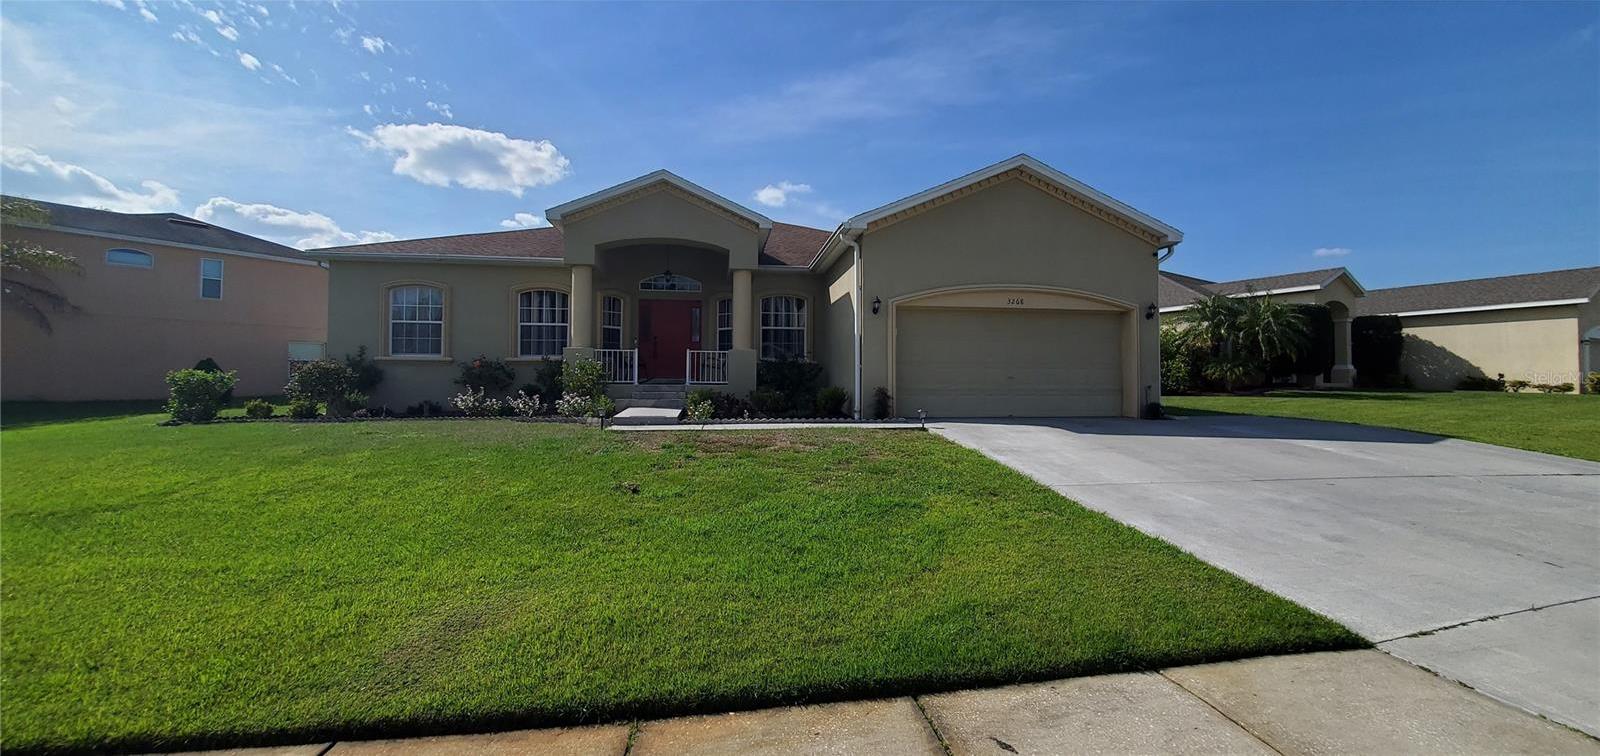 Photo one of 3268 Enclave Blvd Mulberry FL 33860 | MLS T3511946